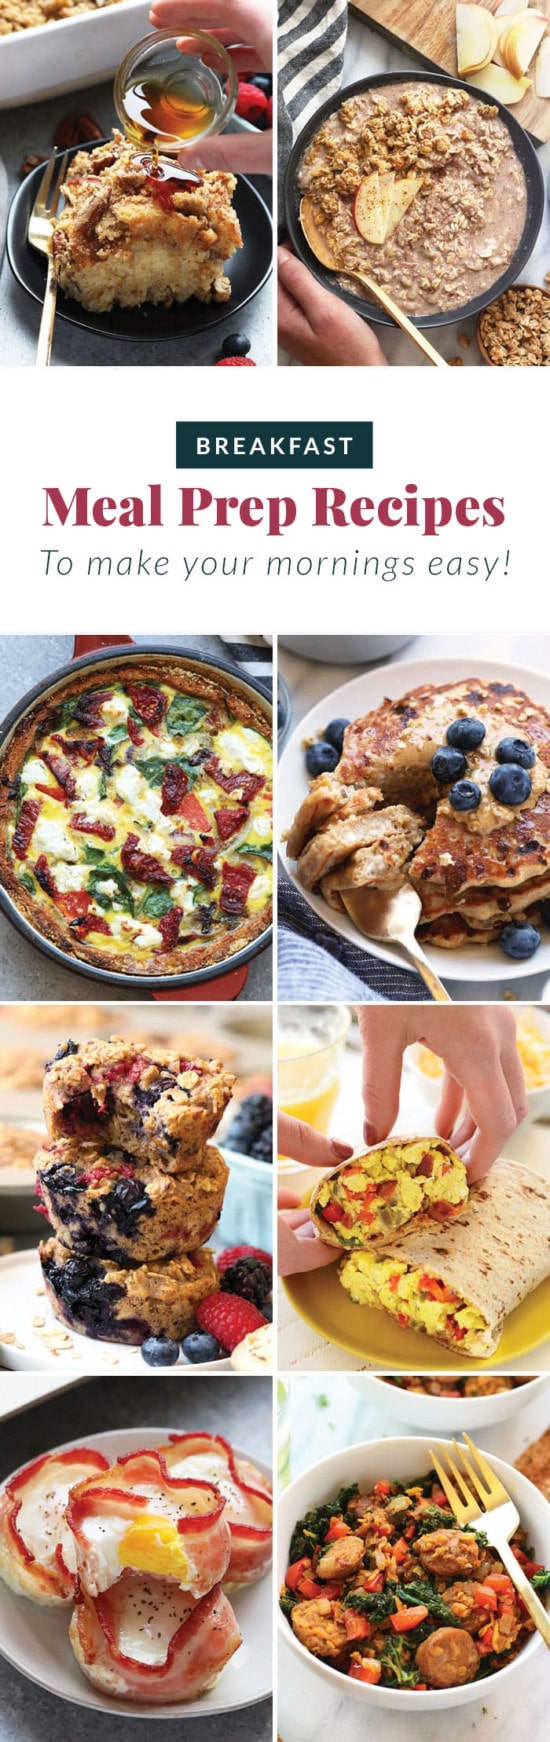 Breakfast Meal Prep Recipes (save time & money!) - Fit Foodie Finds